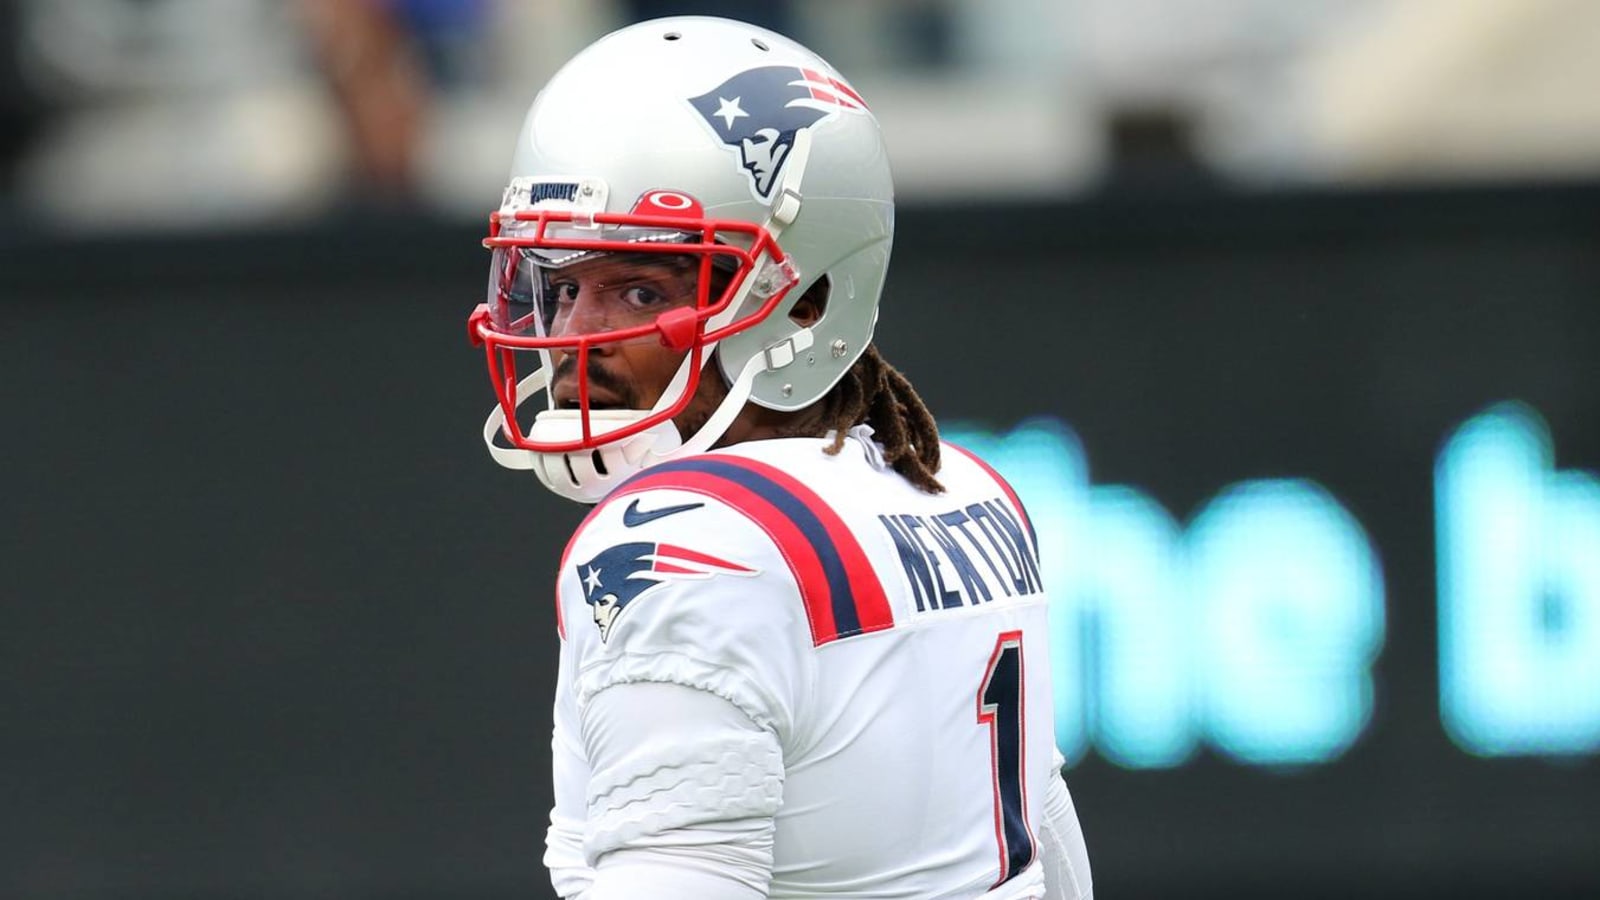 Teams reluctant to sign Newton due to injury, throwing issues?